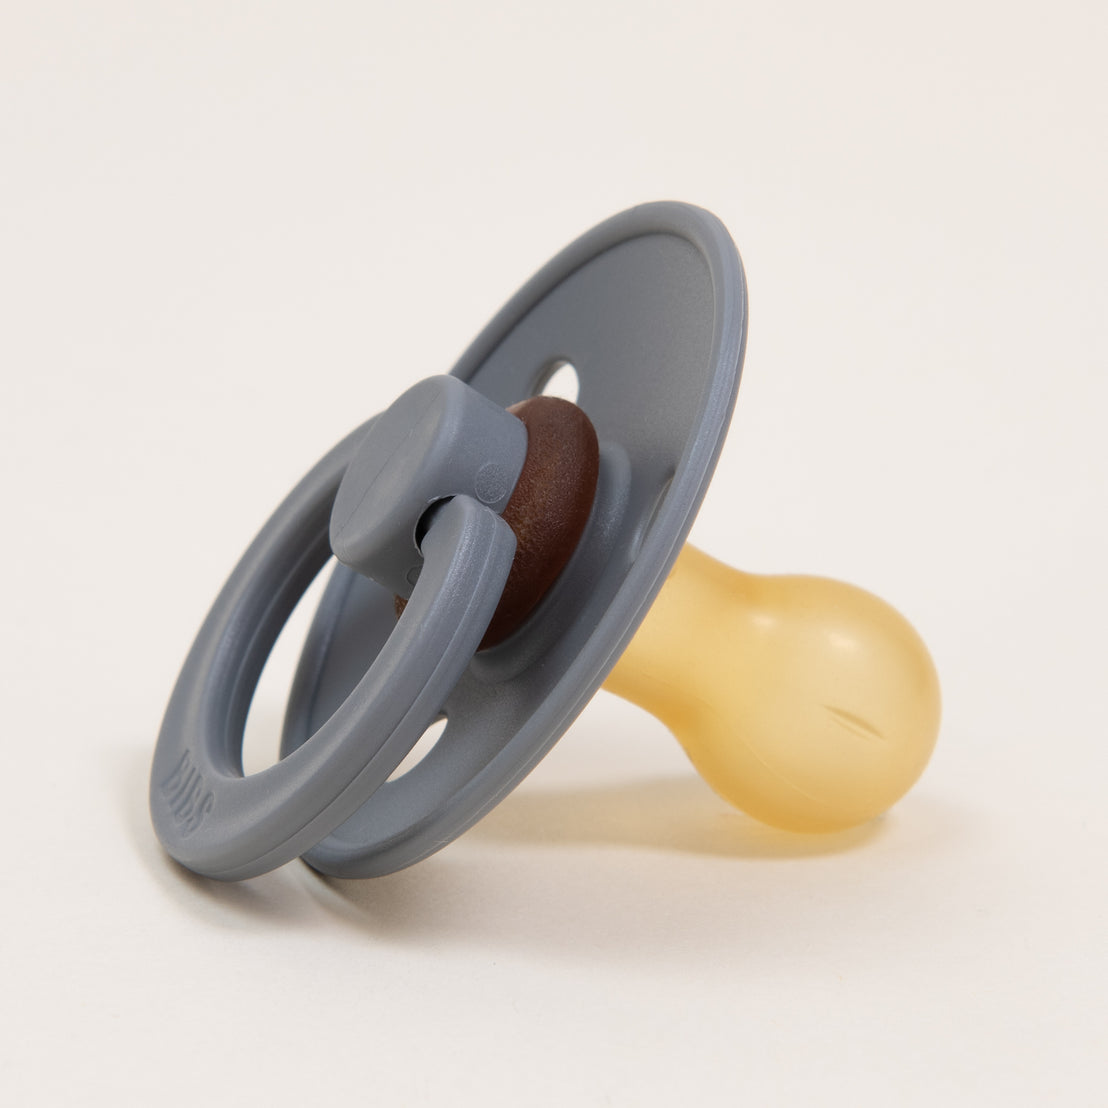 A close-up image of a Bibs Pacifier in Smoke color with a natural gray and brown handle and a yellow nipple, on a light beige background.